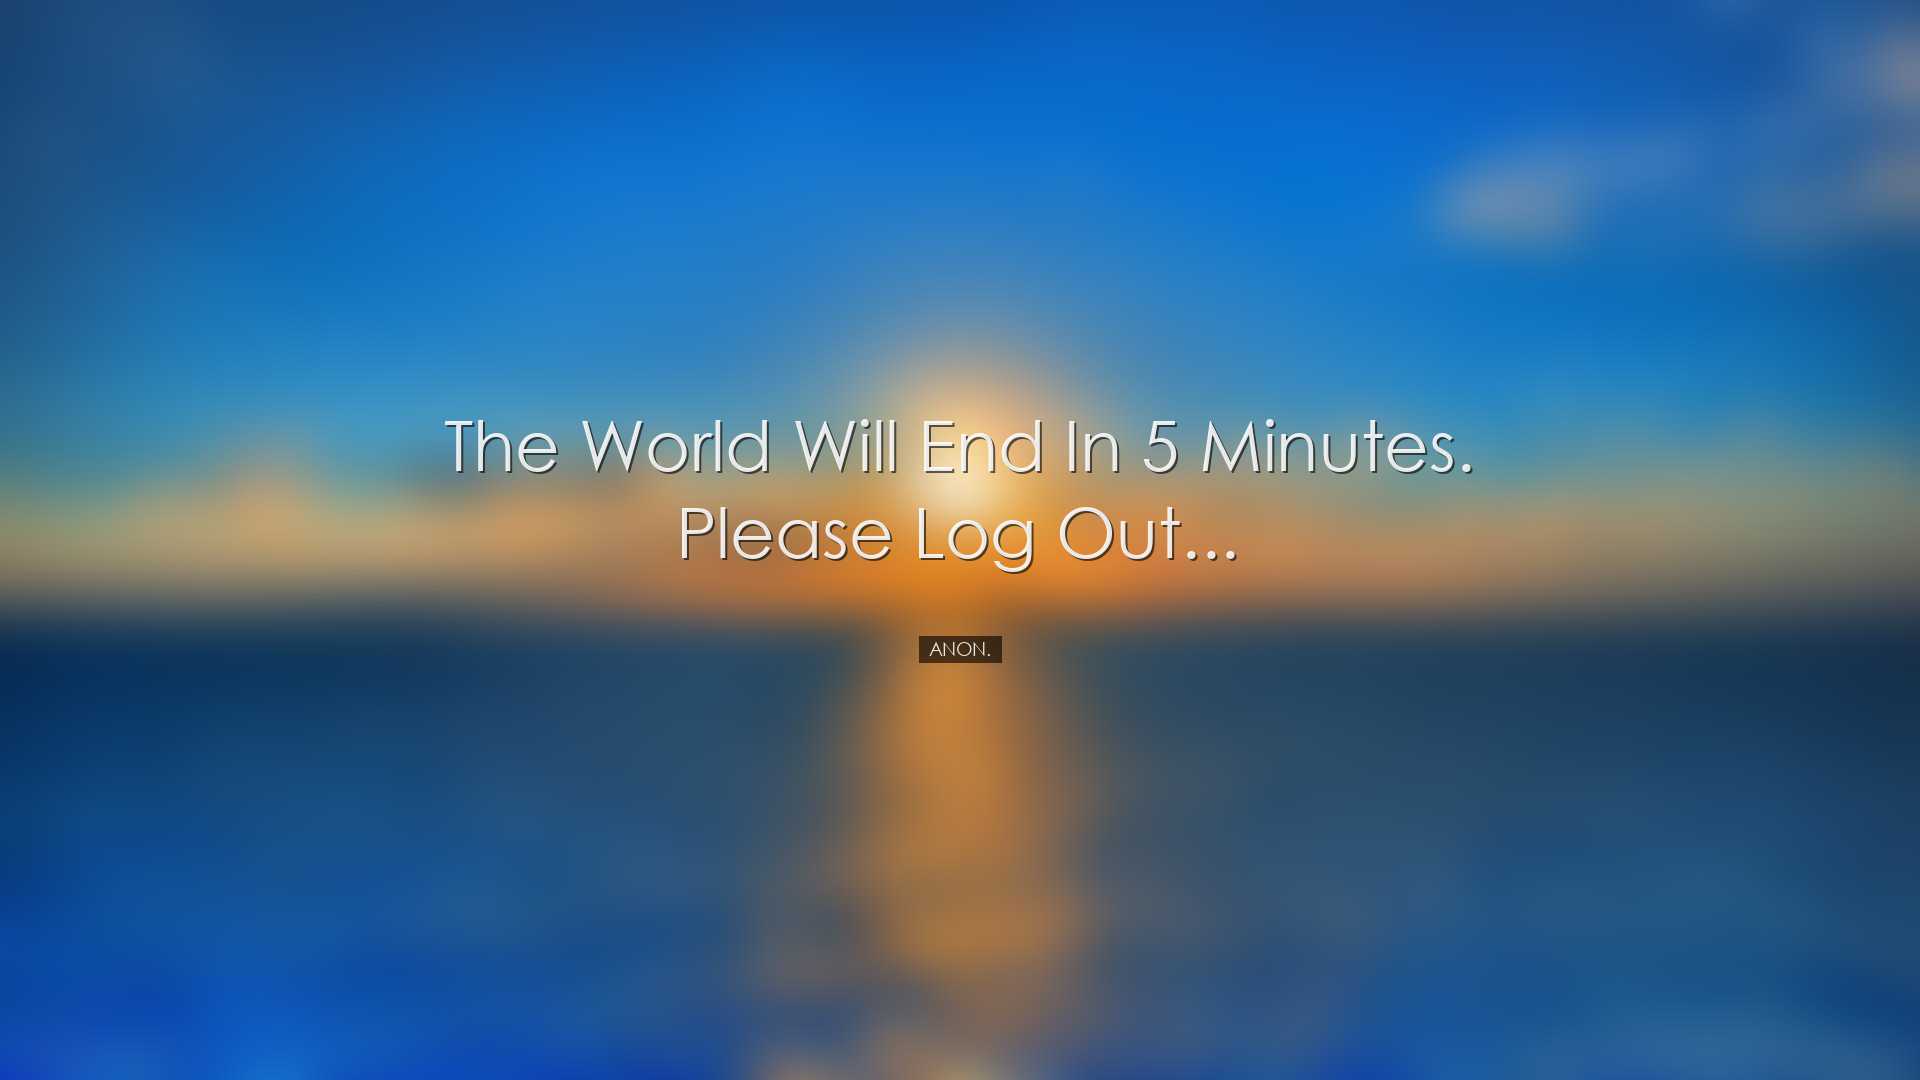 The world will end in 5 minutes. Please log out... - Anon.